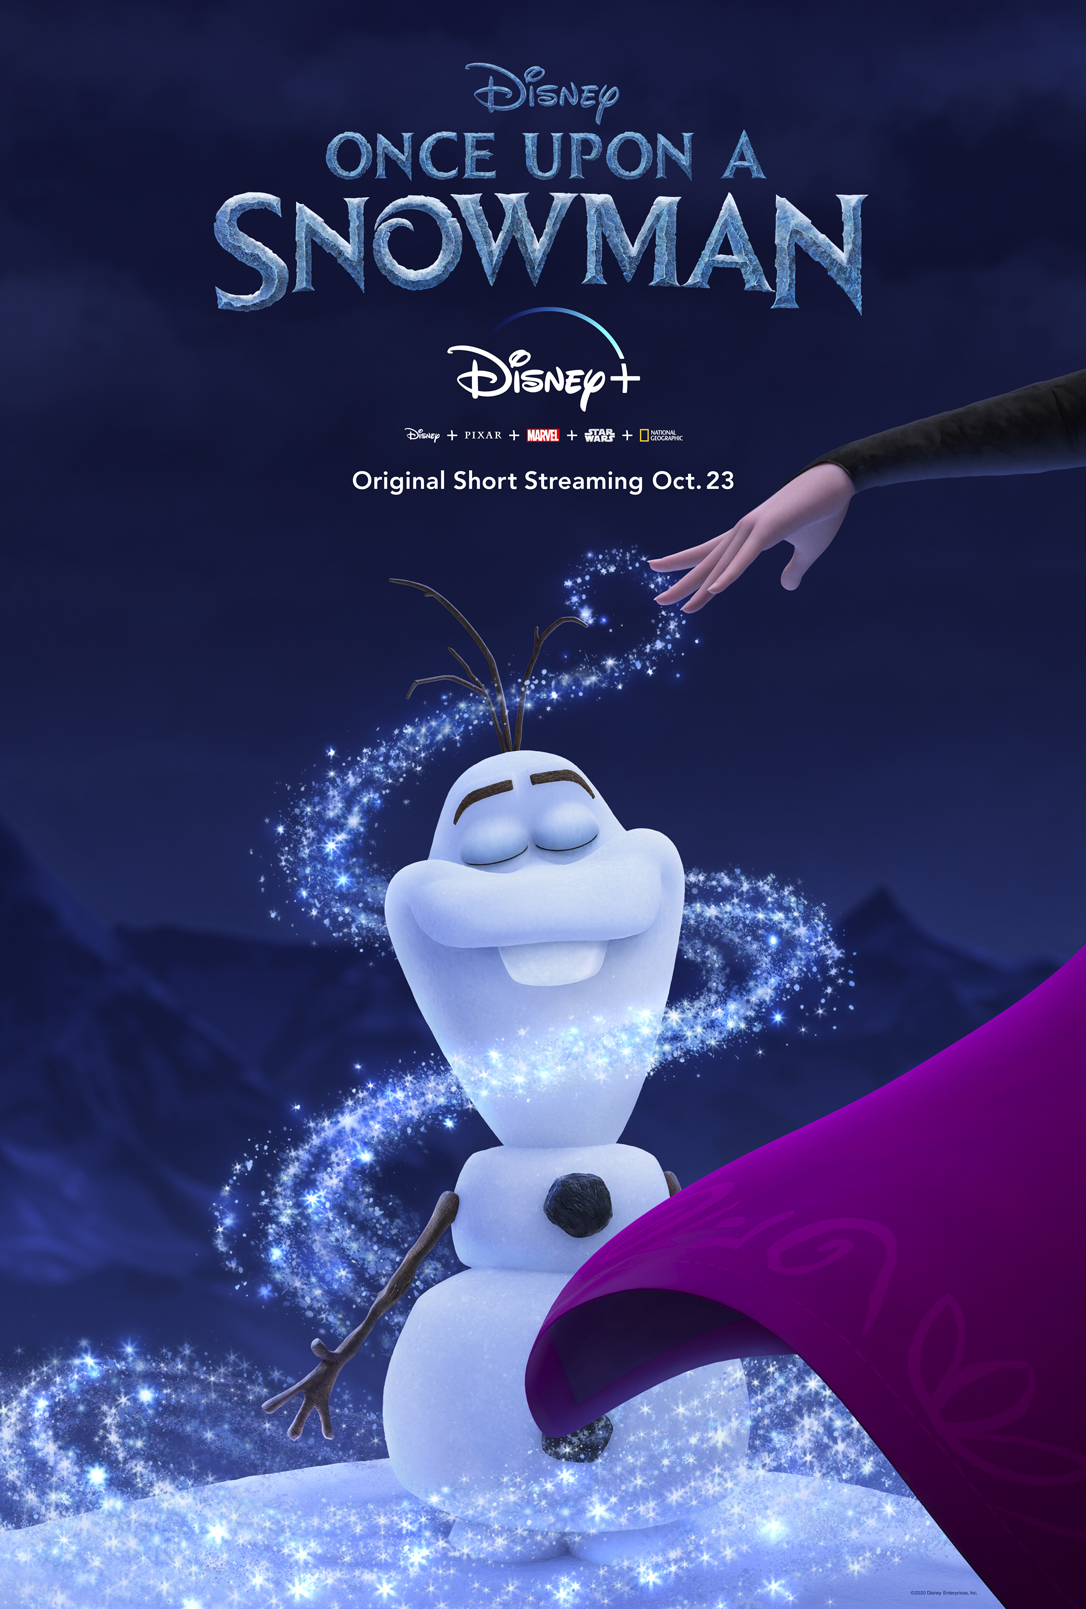 A brand new Disney original short called “Once Upon A Snowman” will be coming to Disney+ on October 23rd